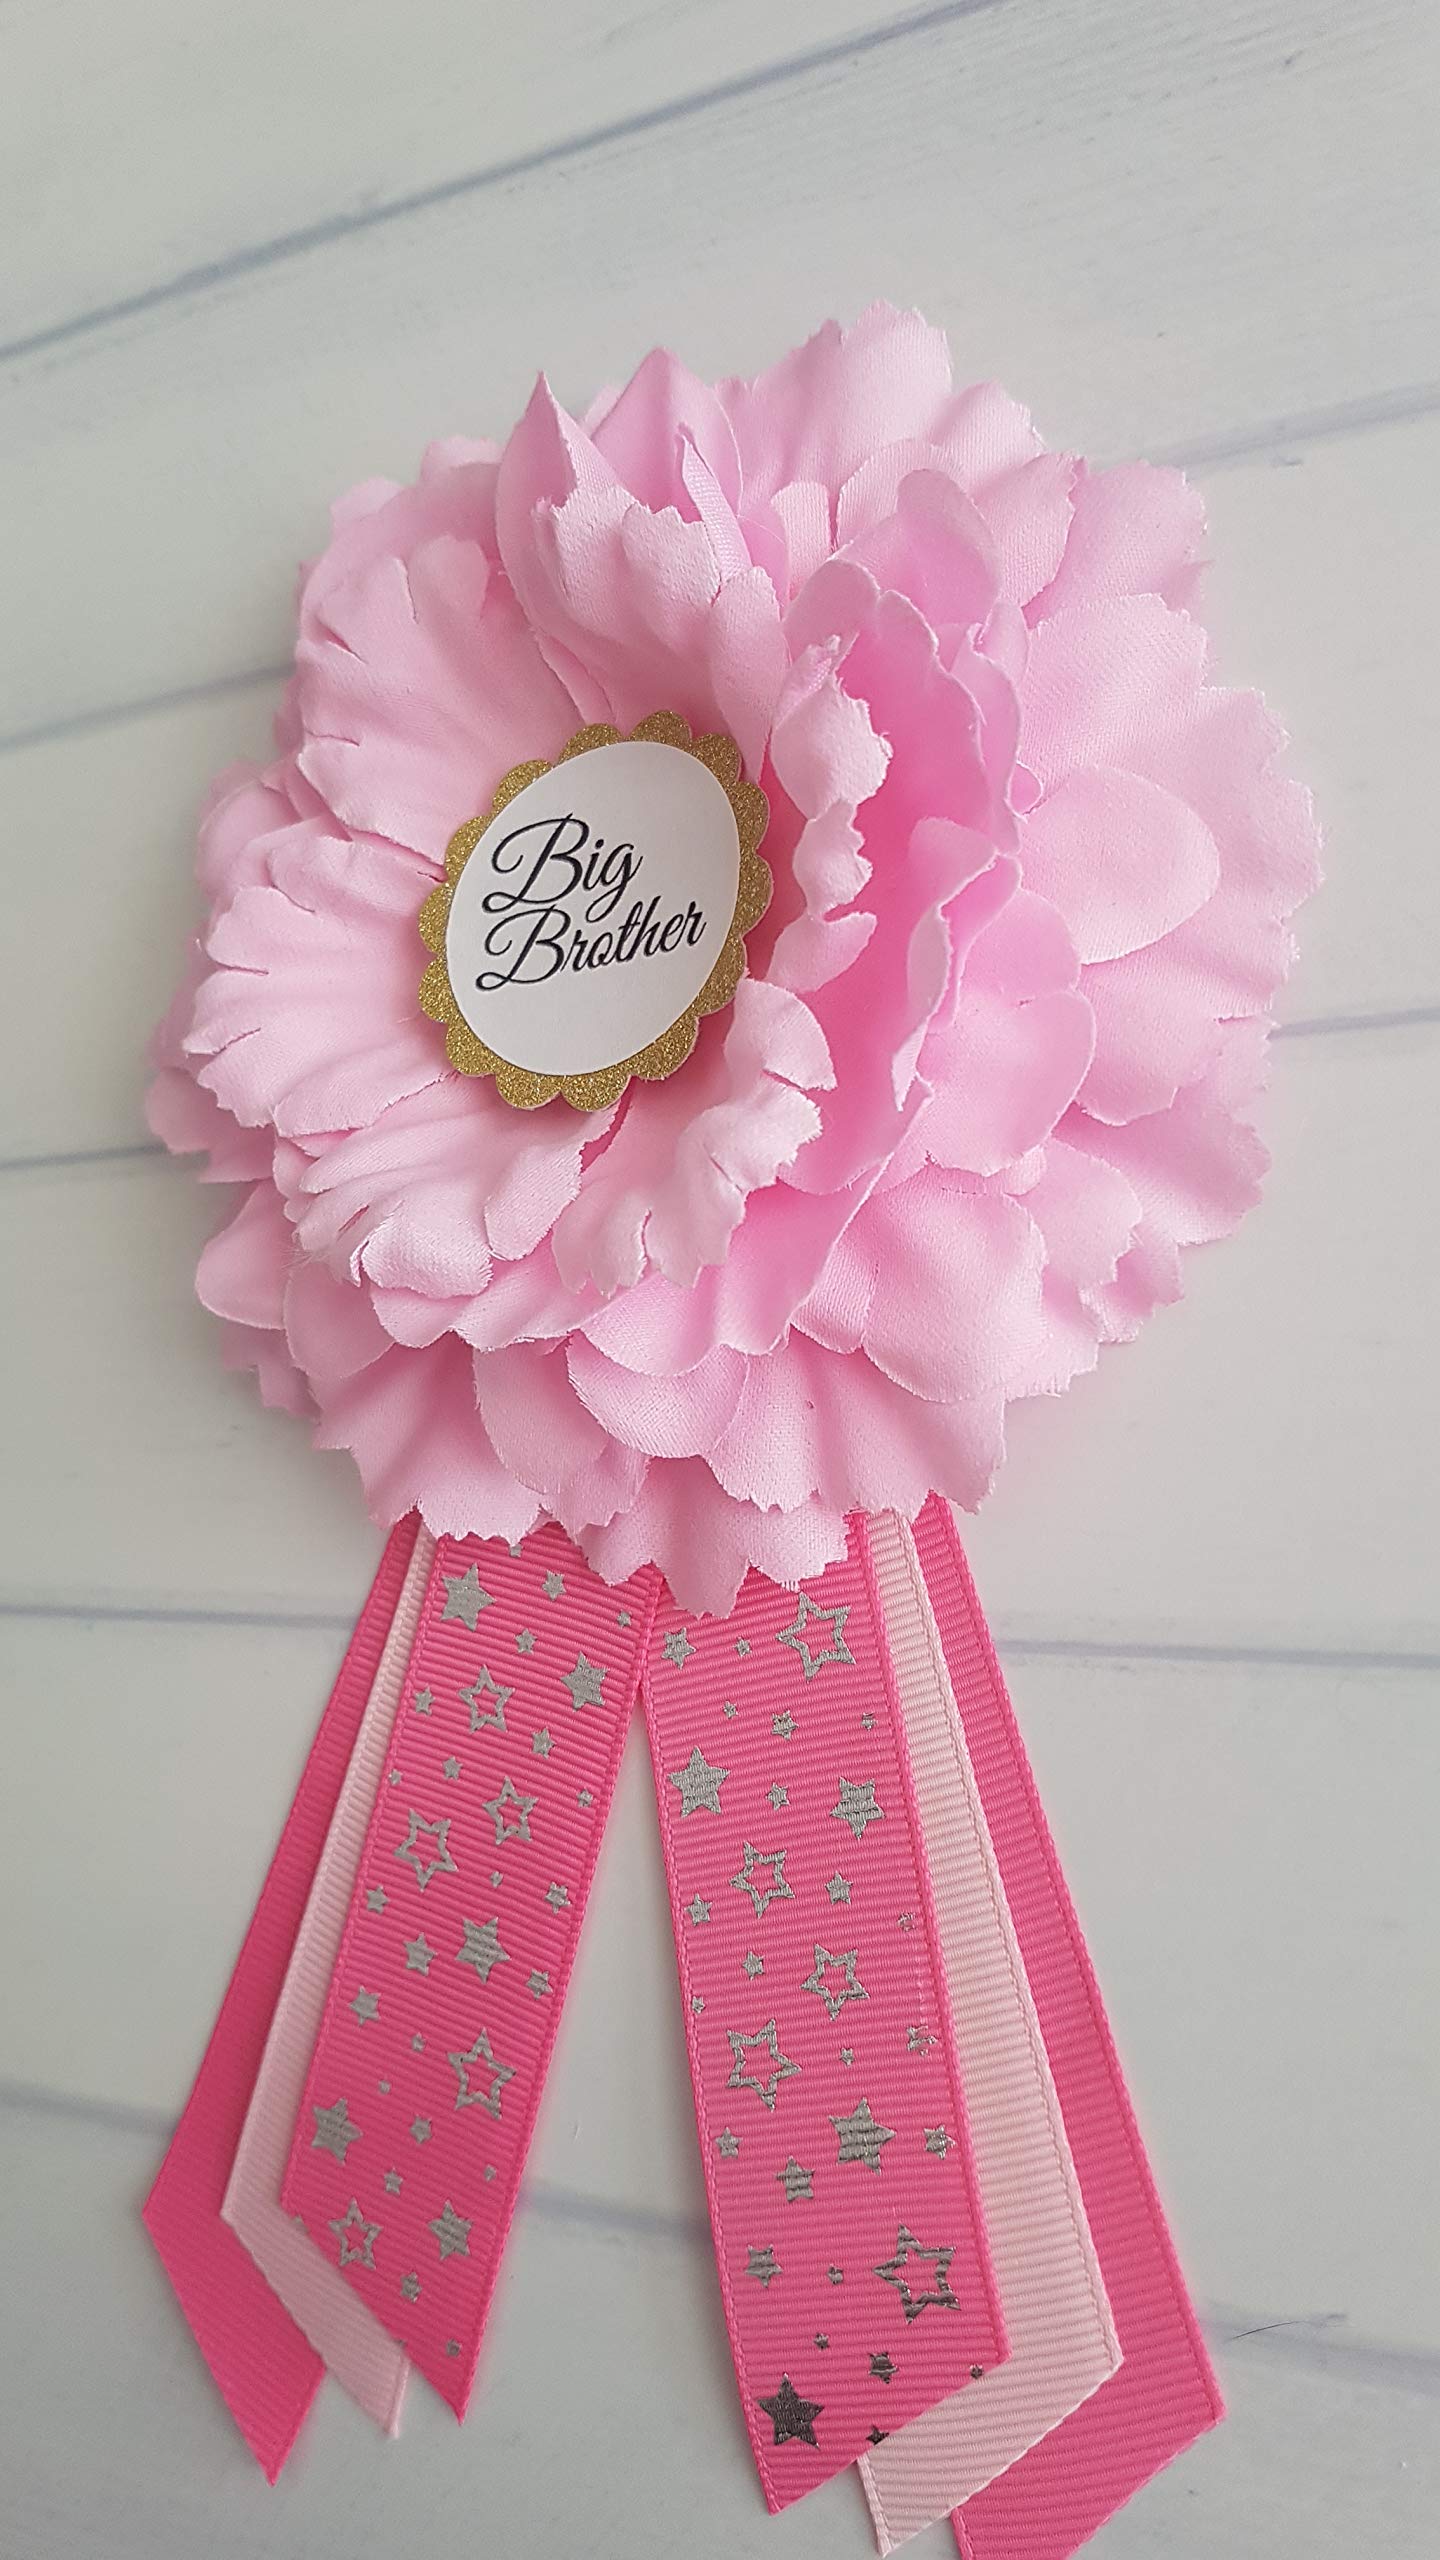 Shower Sash and Pins for Baby Girl Shower by LMC | Mommy To Be Sash and Corsage | USA Handmade | Hot Pink (Big Brother pin)